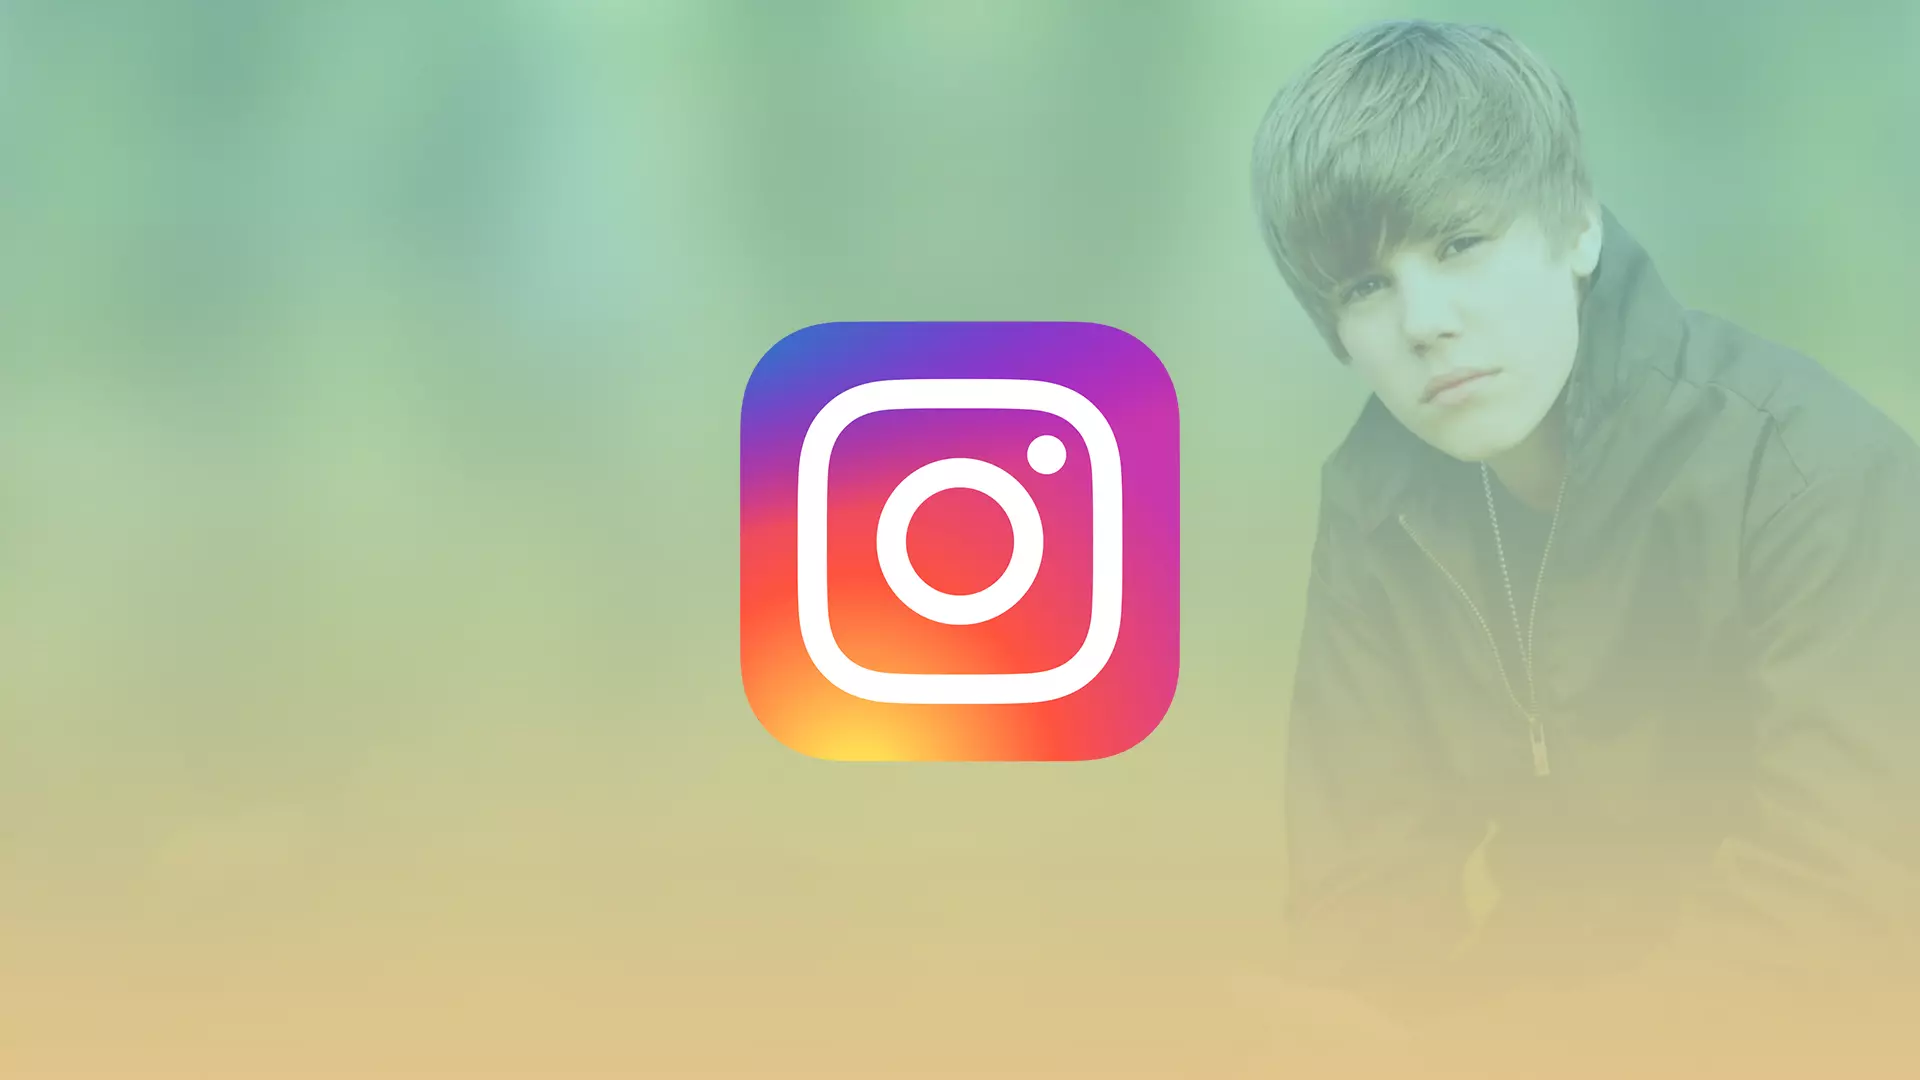 Instagram plans to limit sensitive content to new teenage users by default